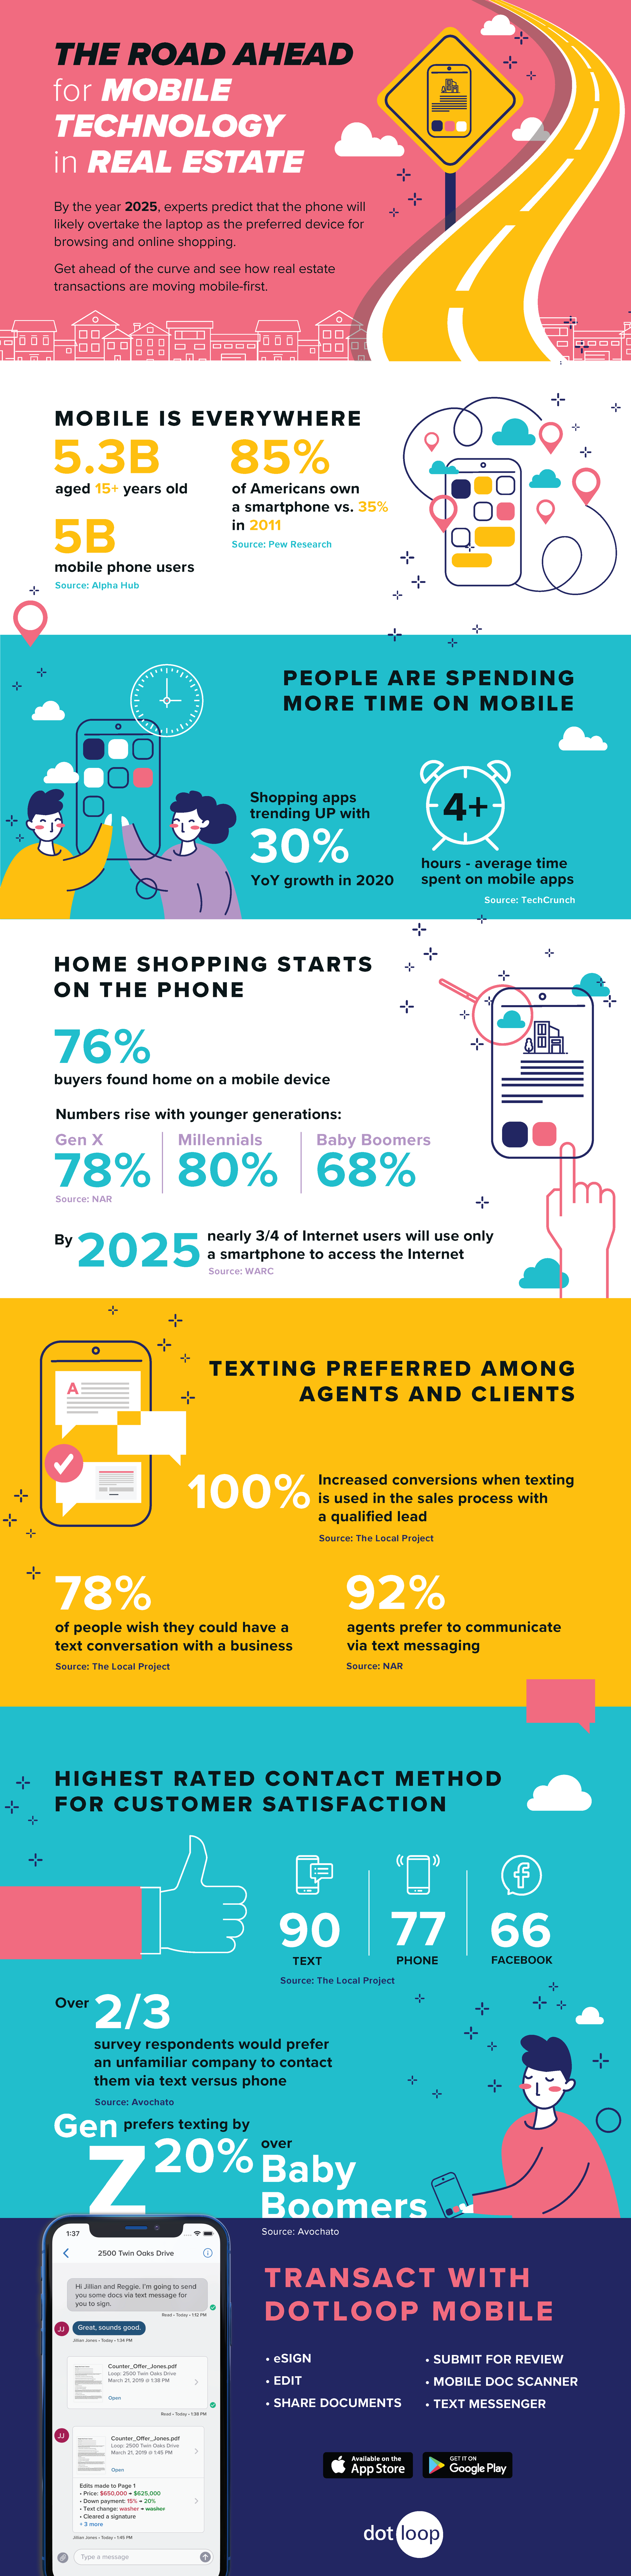 Infographic: The Road Ahead for for Mobile Technology in Real Estate